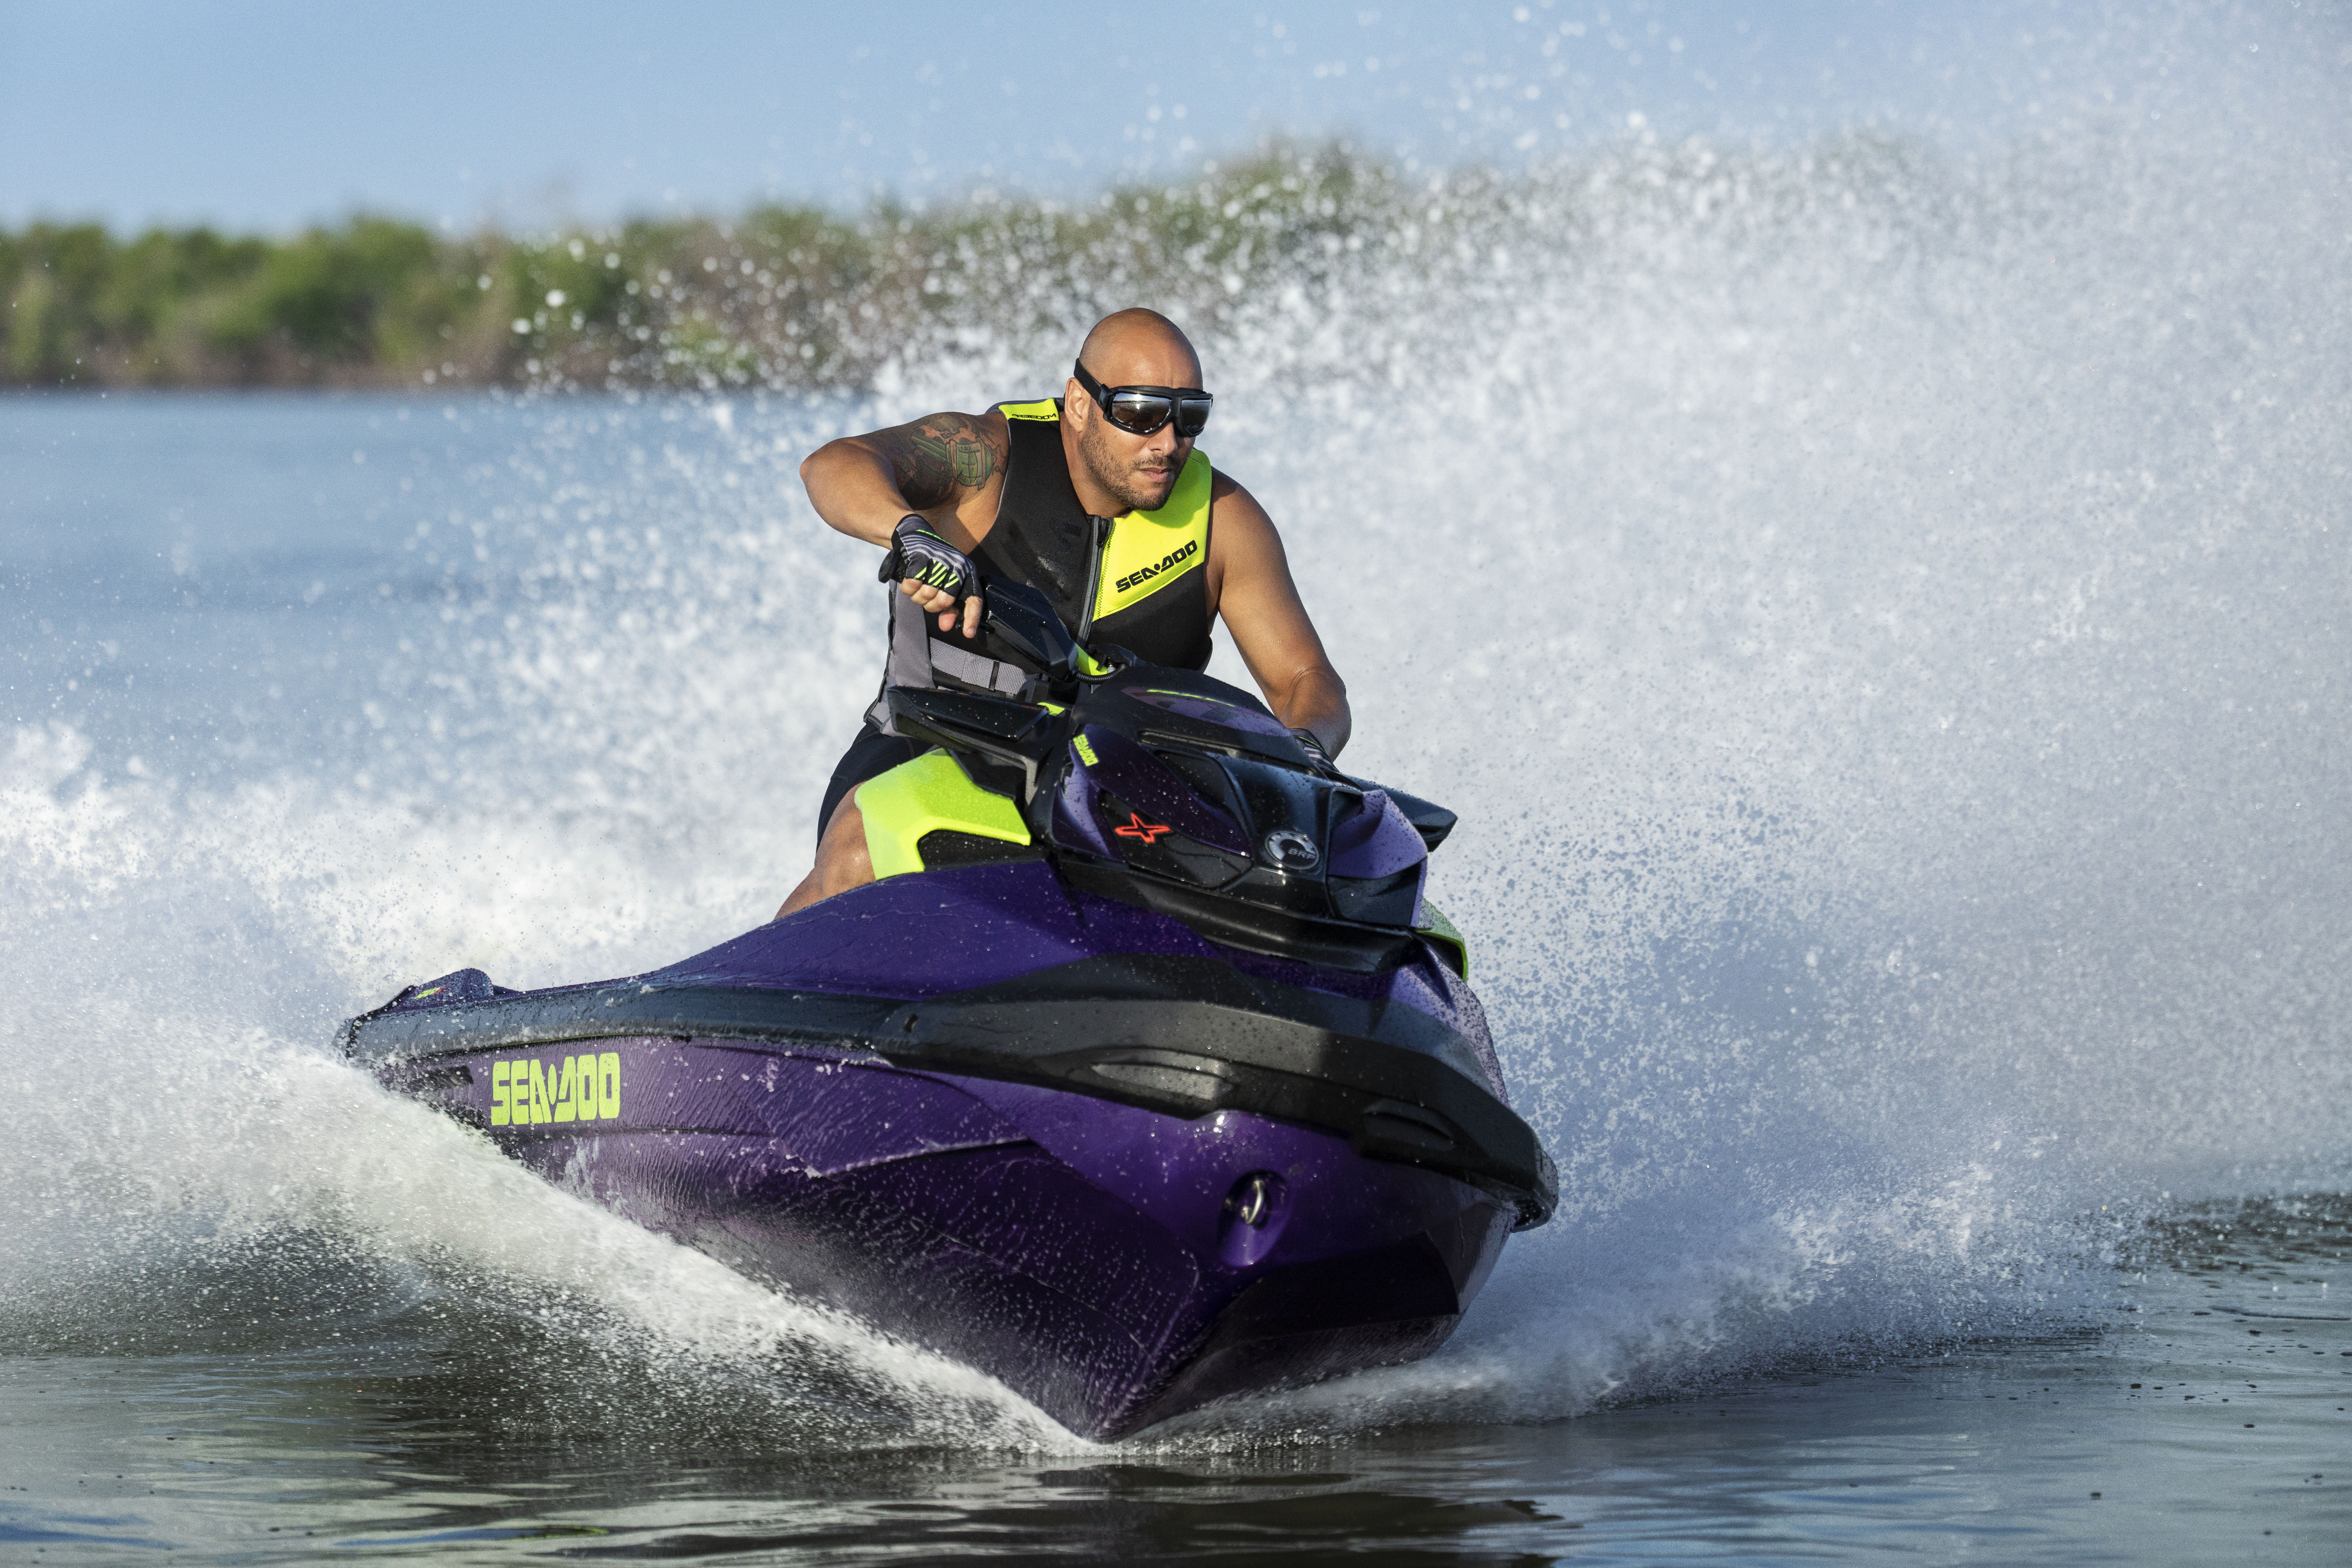 THE SEA-DOO RXP-X RS 300 HAS WON THE 2021 WATERCRAFT OF THE YEAR!